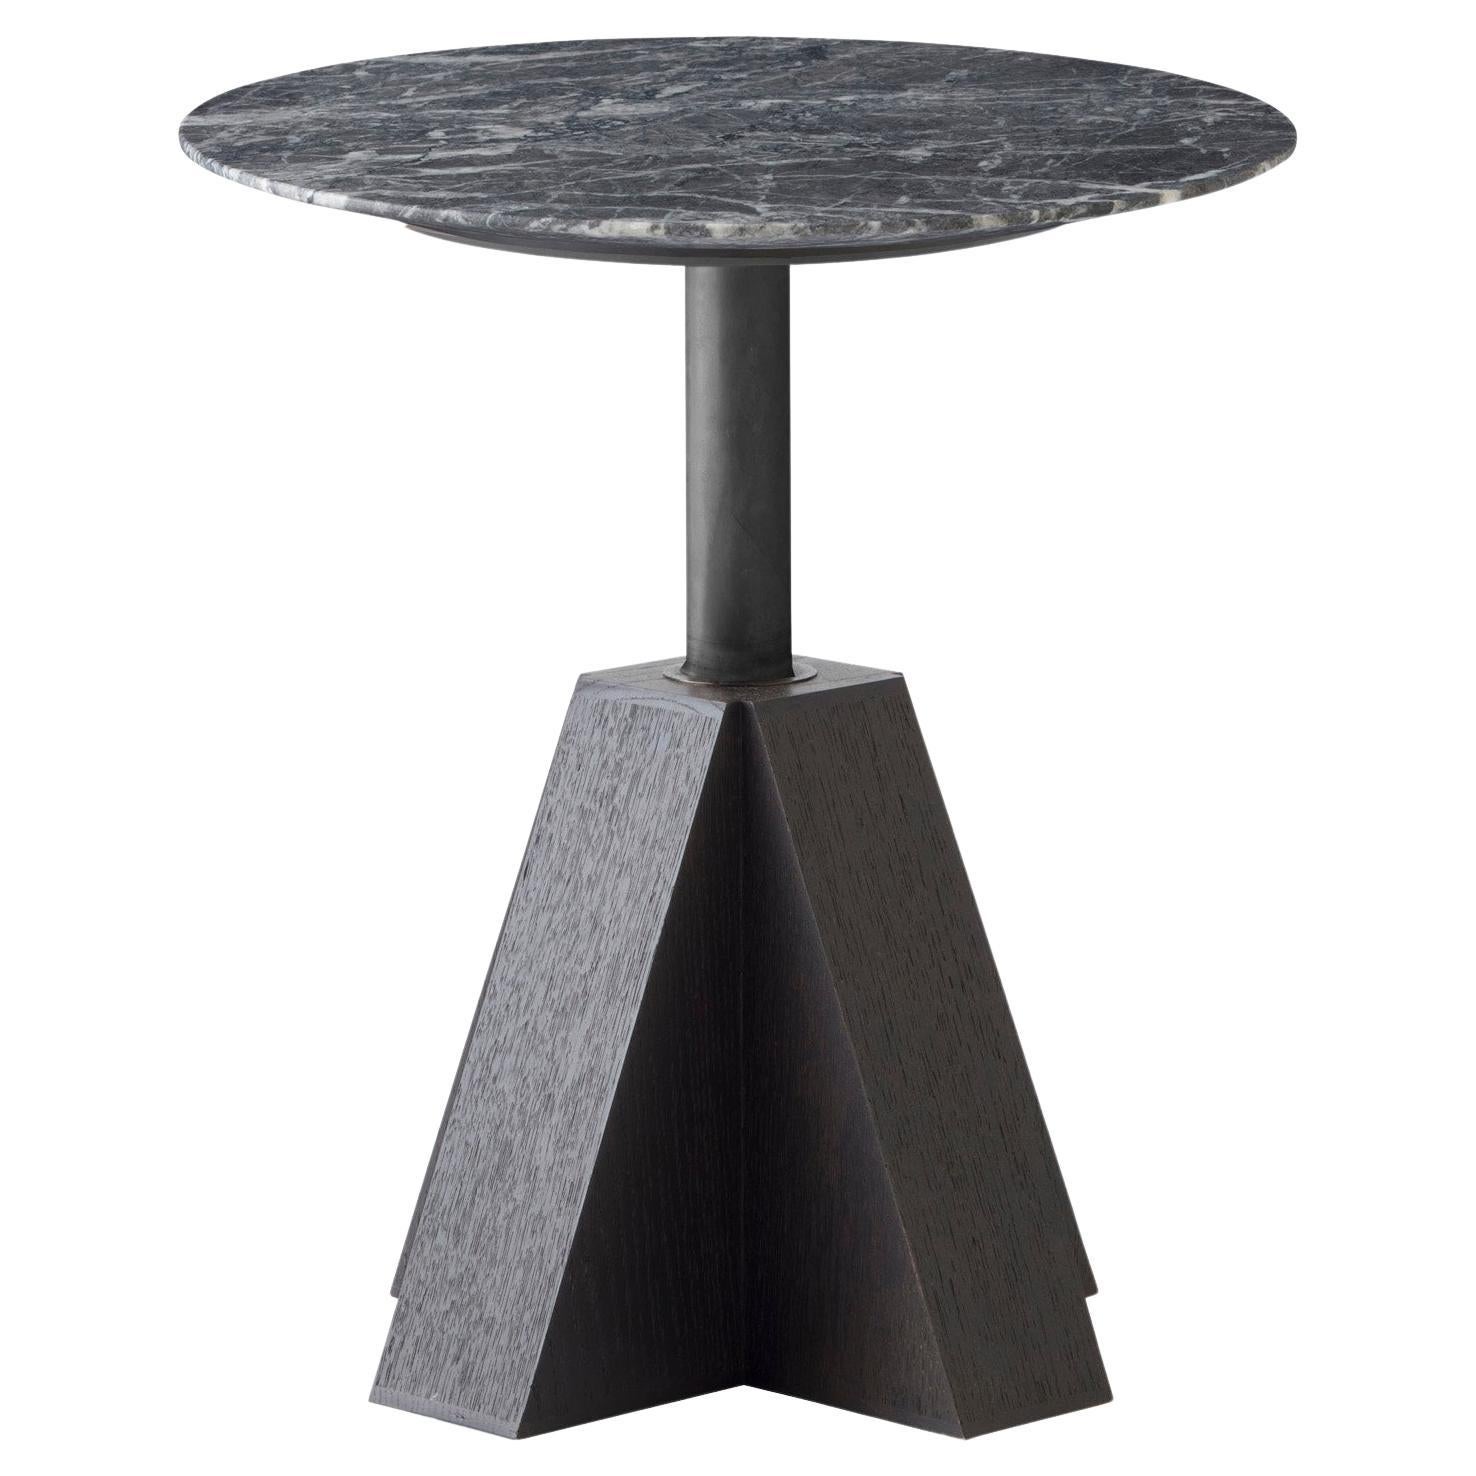 M-Side Table by Daniel Boddam, Smoked or Stained Oak/Grey Marble For Sale